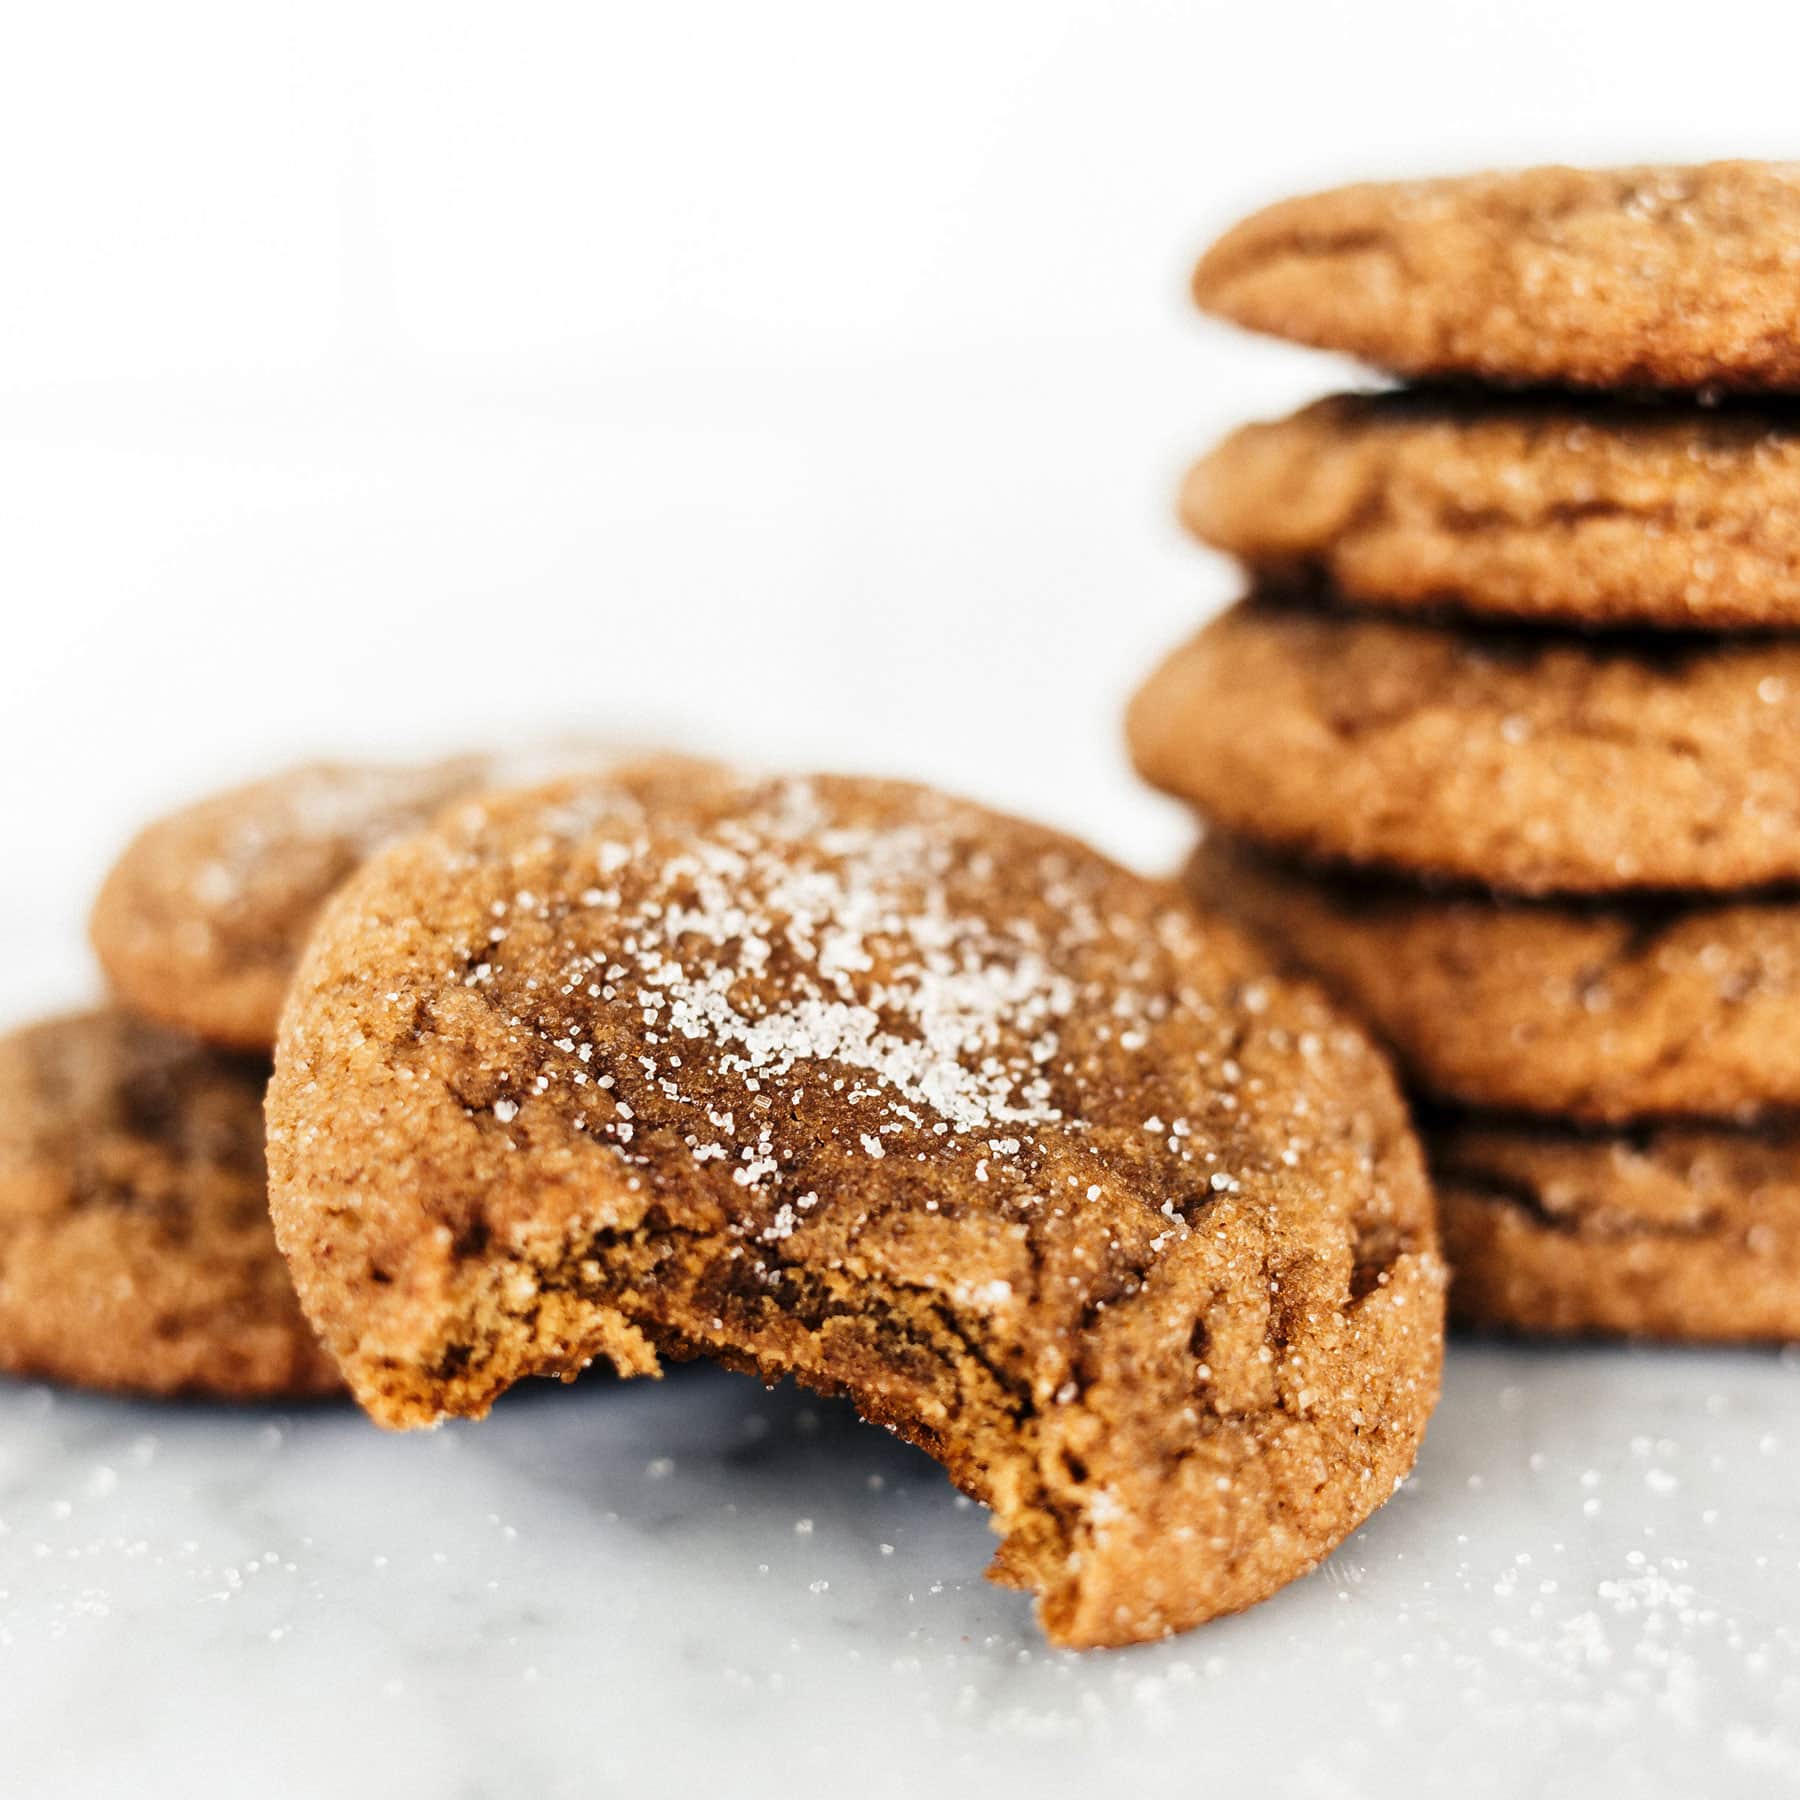 The perfect combination of snickerdoodle and gingersnap, these Gingerdoodle cookies are puffy and soft and filled with warm spices. Cookie baking make-ahead and storage tips included.